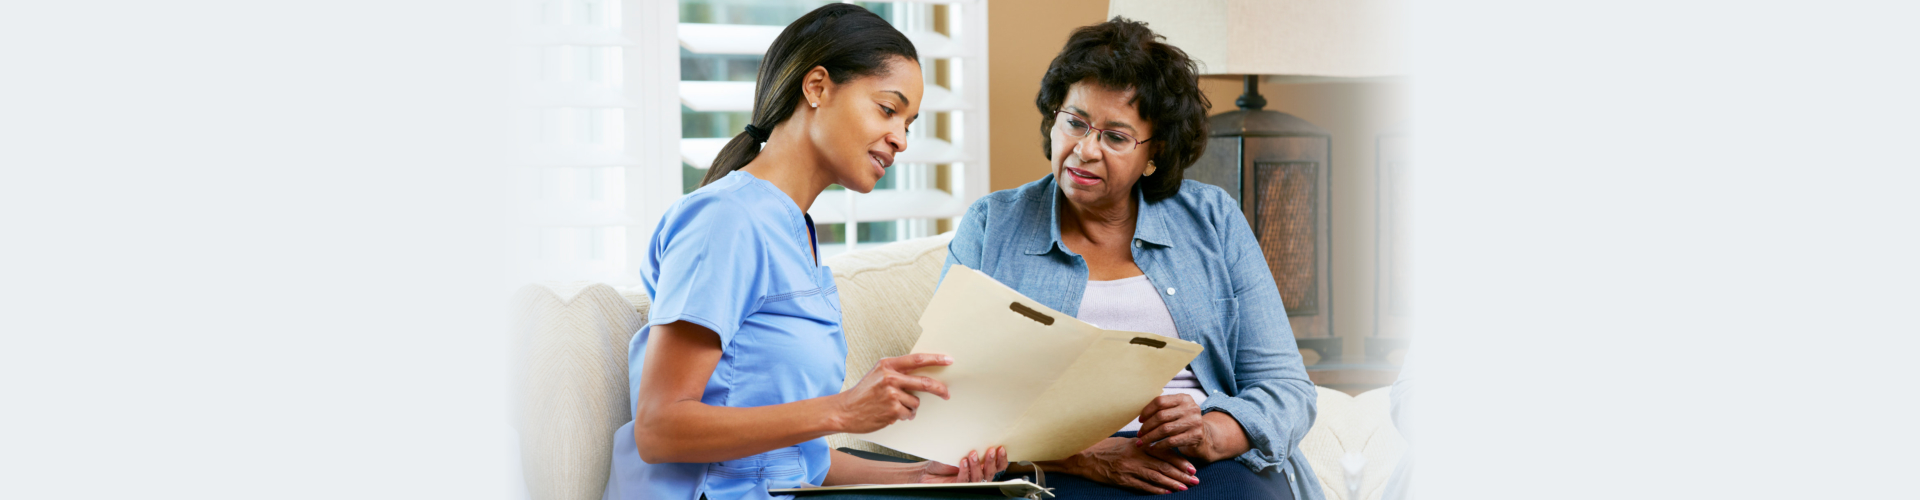 Nurse Discussing Records With Senior Female Patient During Home Visit Talking